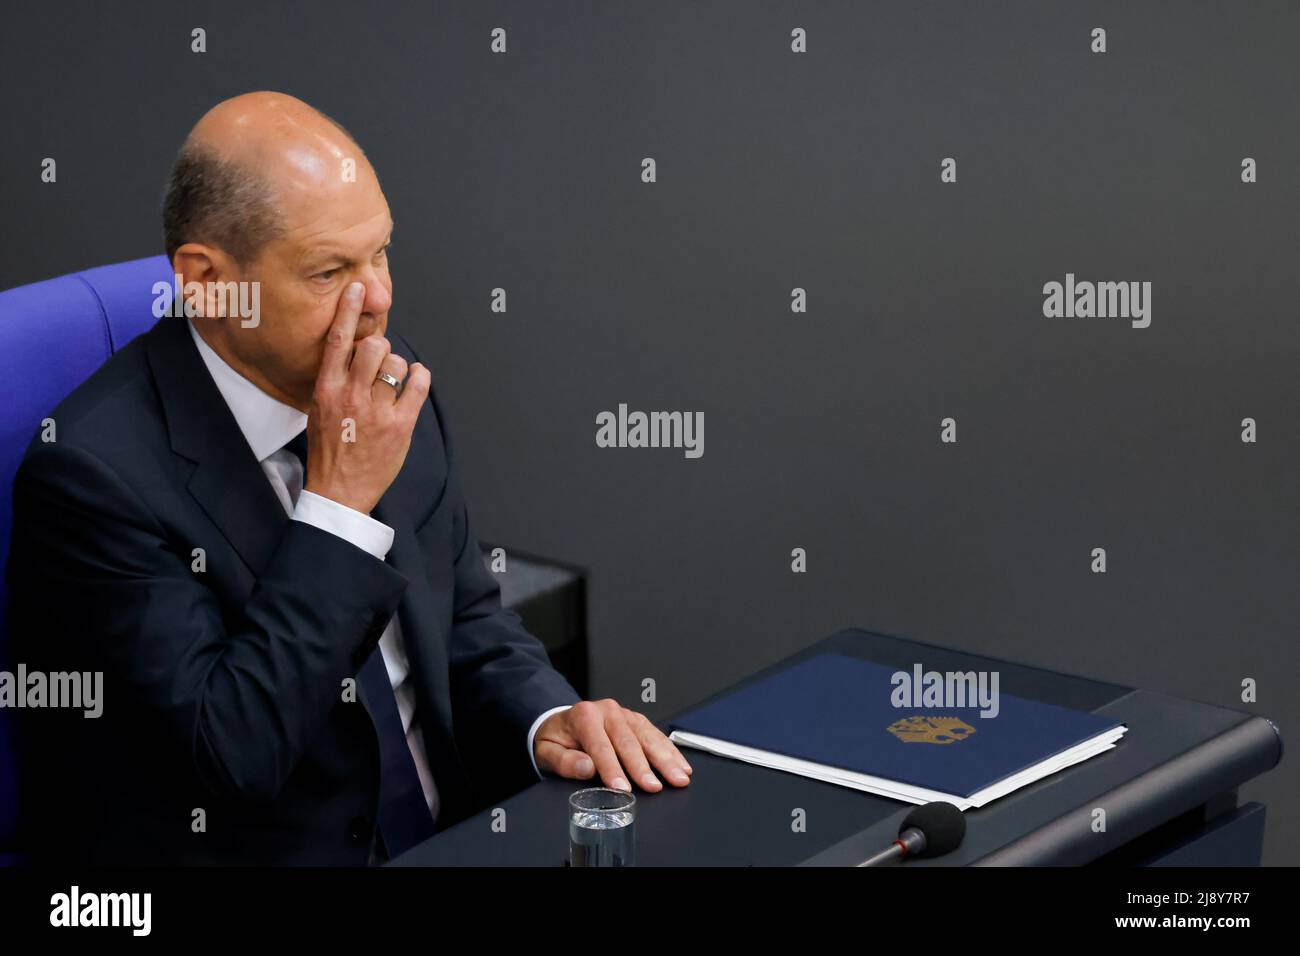 German Chancellor Olaf Scholz attends a session of Germany's lower house of parliament, the Bundestag, in Berlin, Germany, May 19, 2022. REUTERS/Hannibal Hanschke Stock Photo